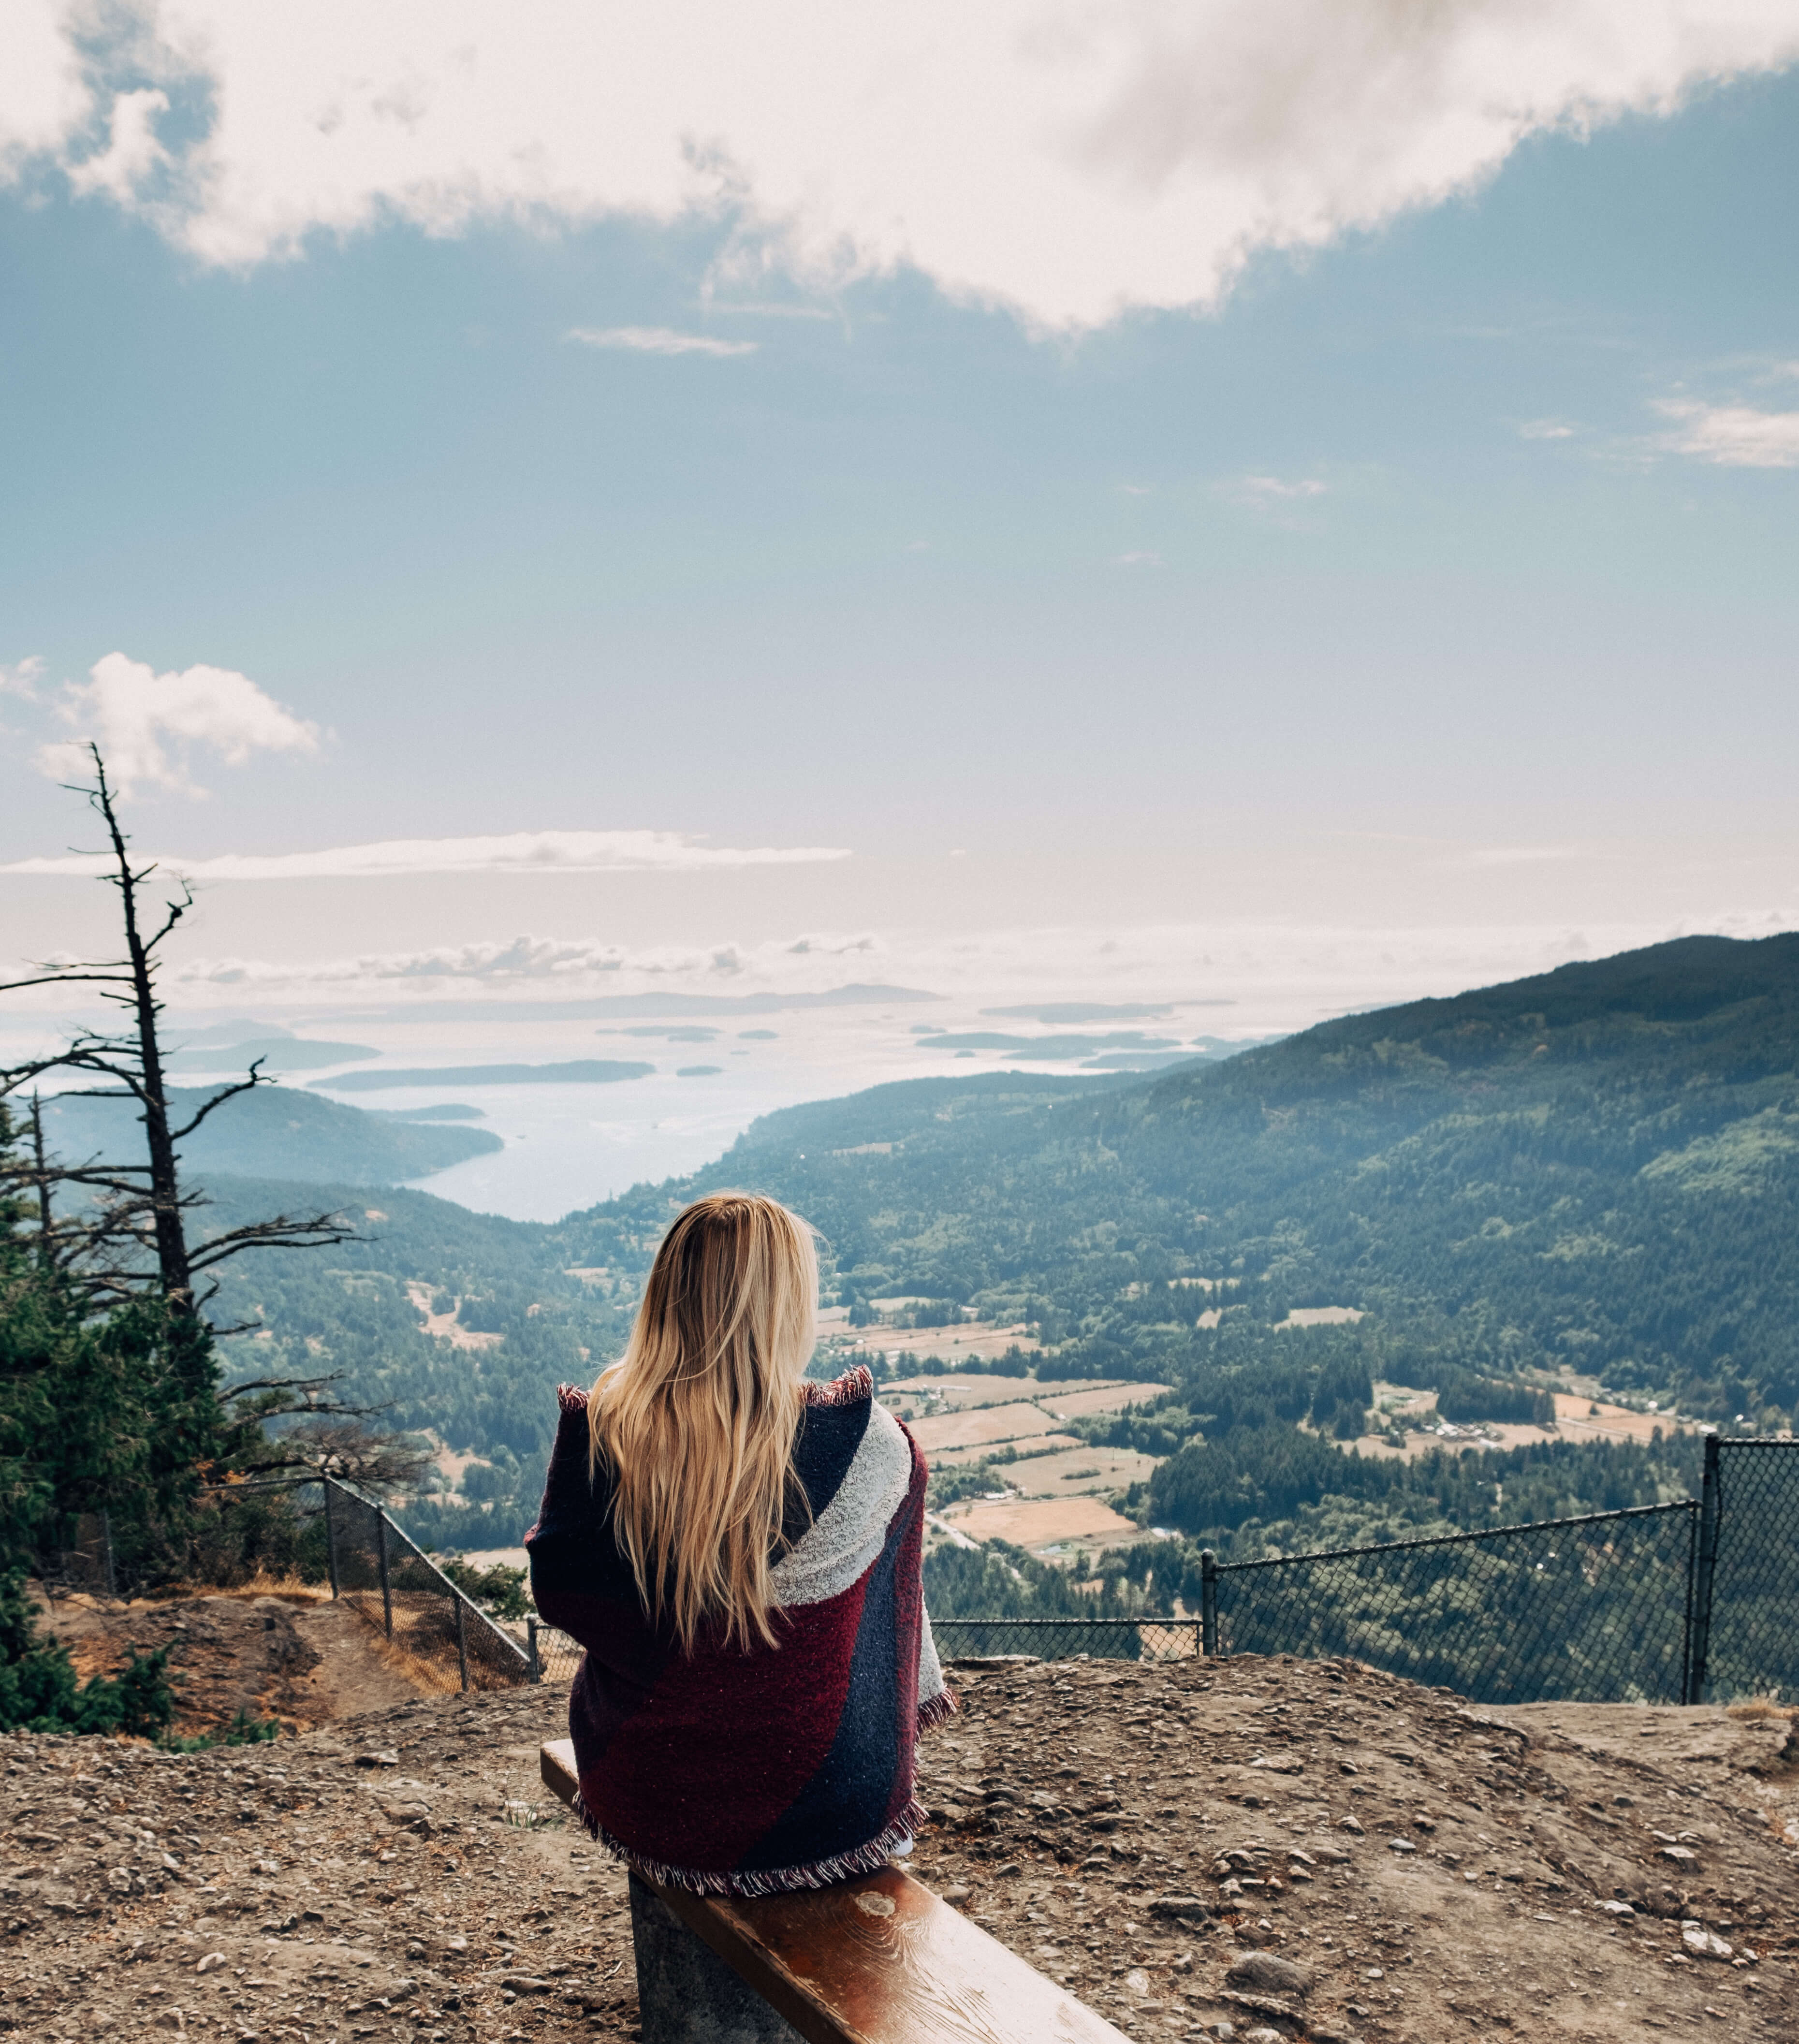 Things to do on Salt Spring Island: Hike Mount Maxwell